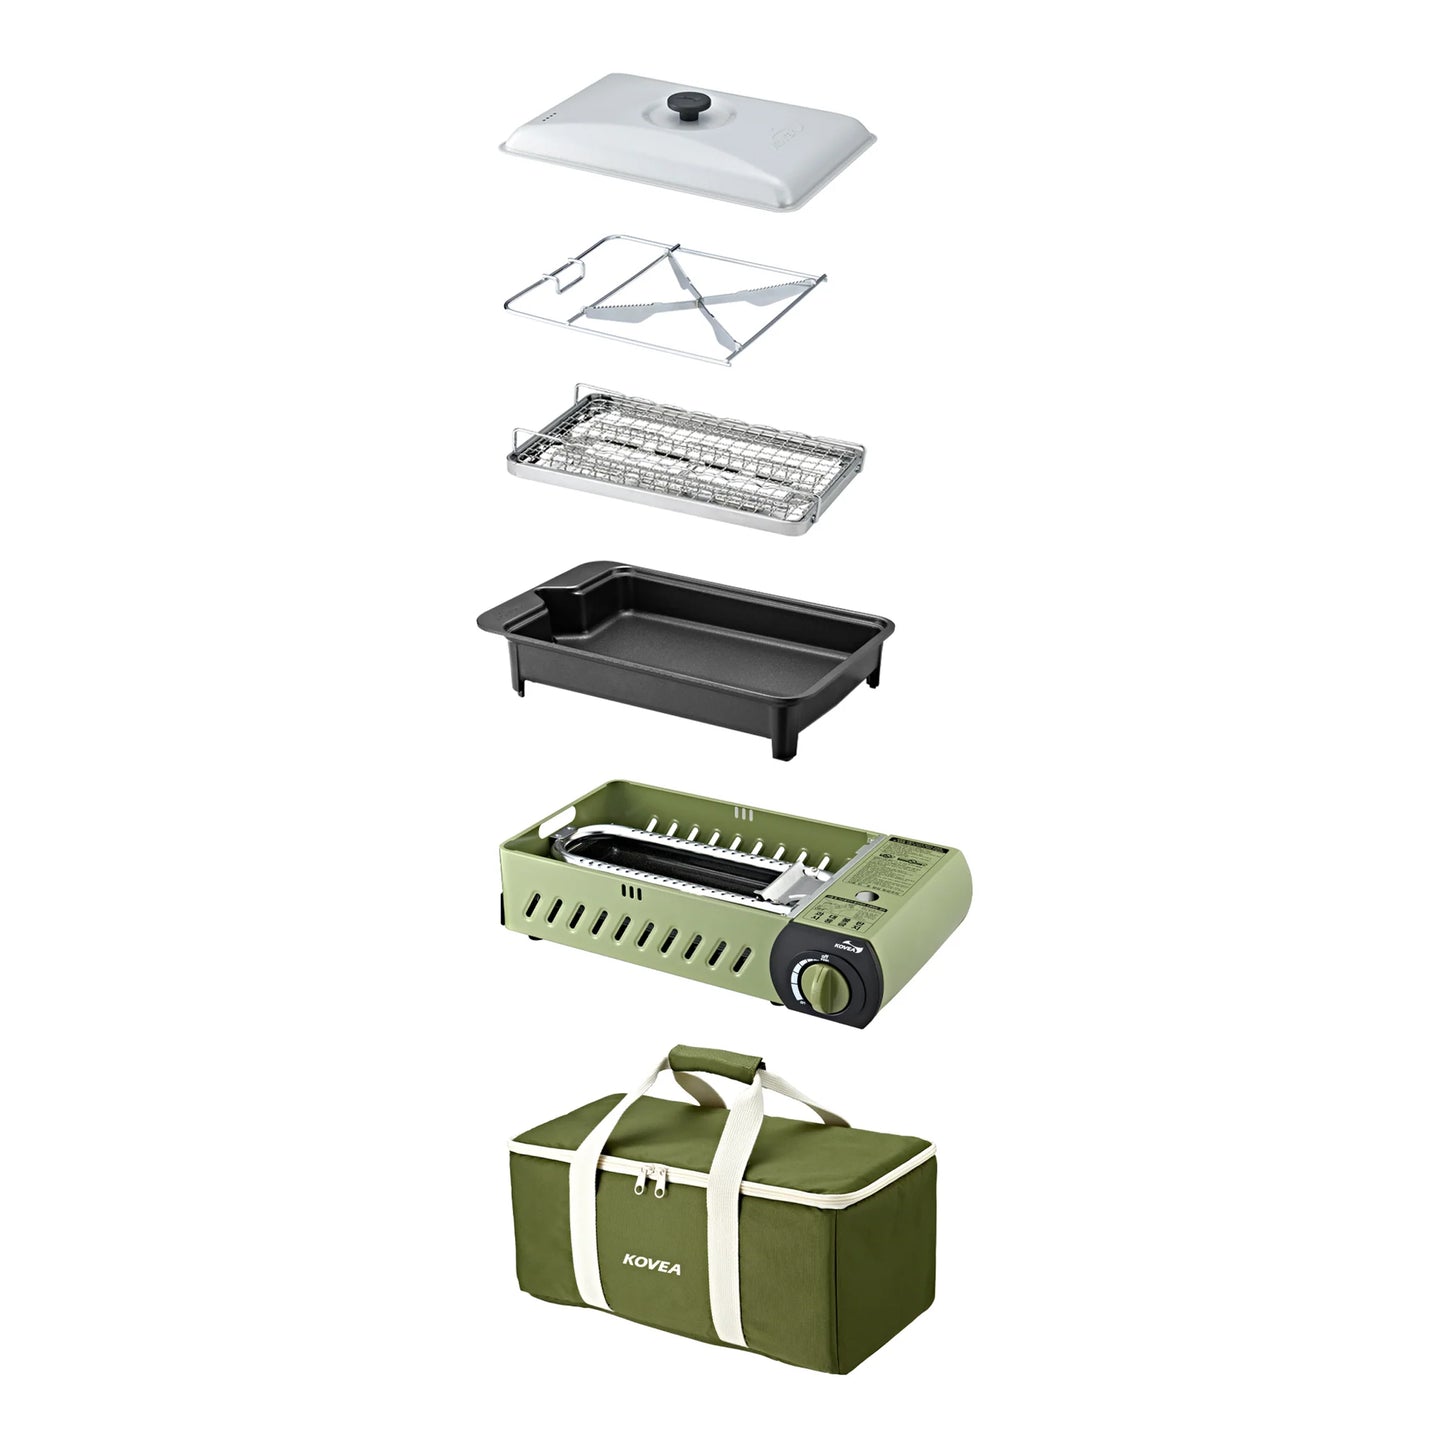 [Kovea] All in One Gas BBQ Grill (M) Olive Green With Bag